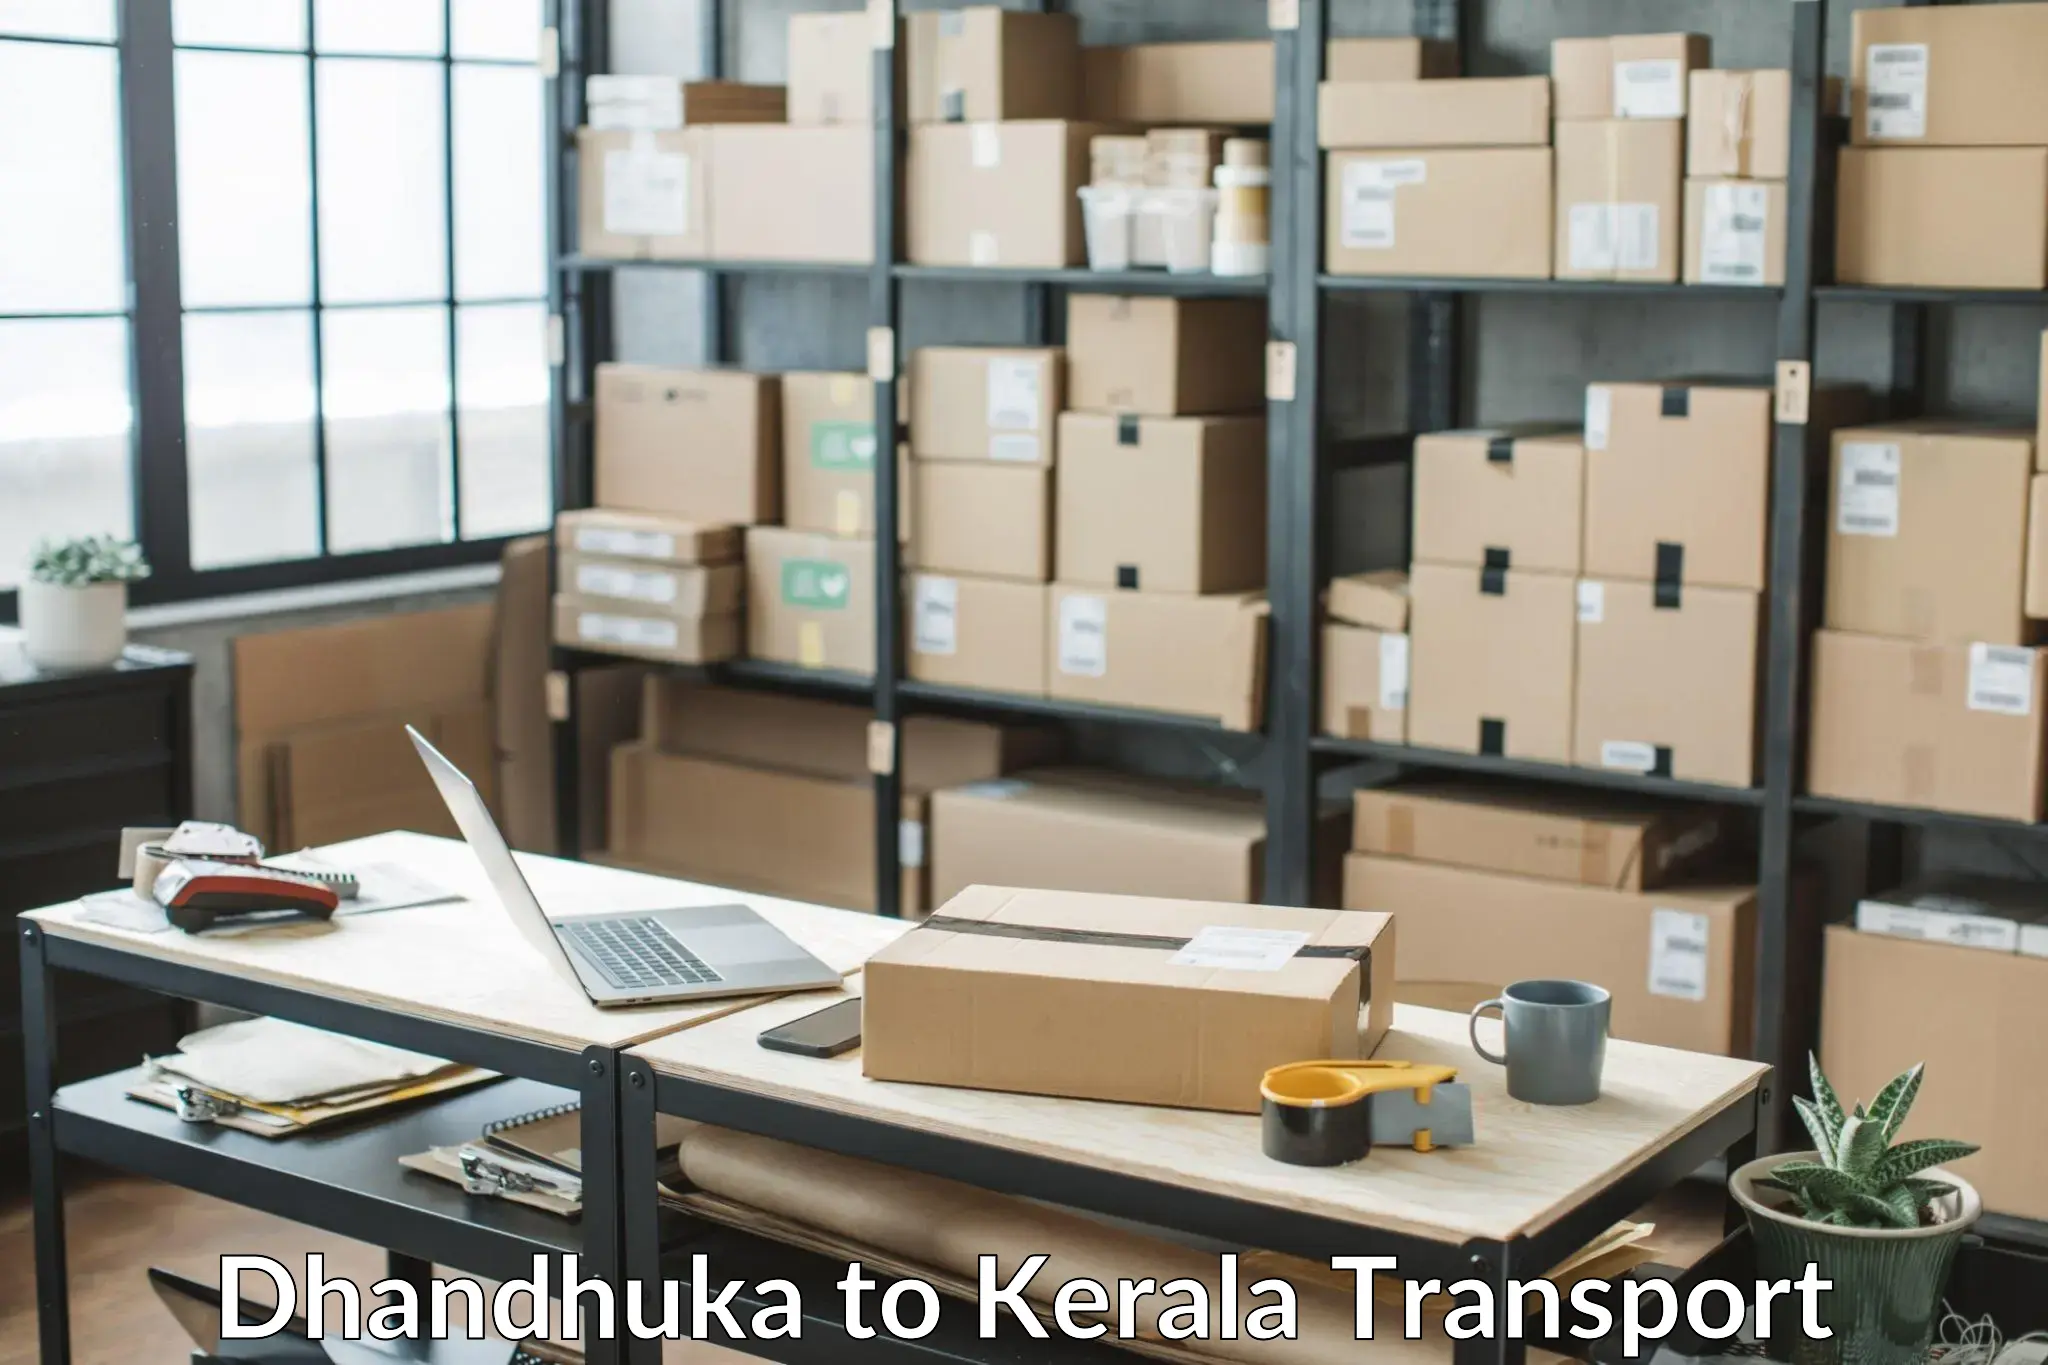 Nearby transport service Dhandhuka to Pala